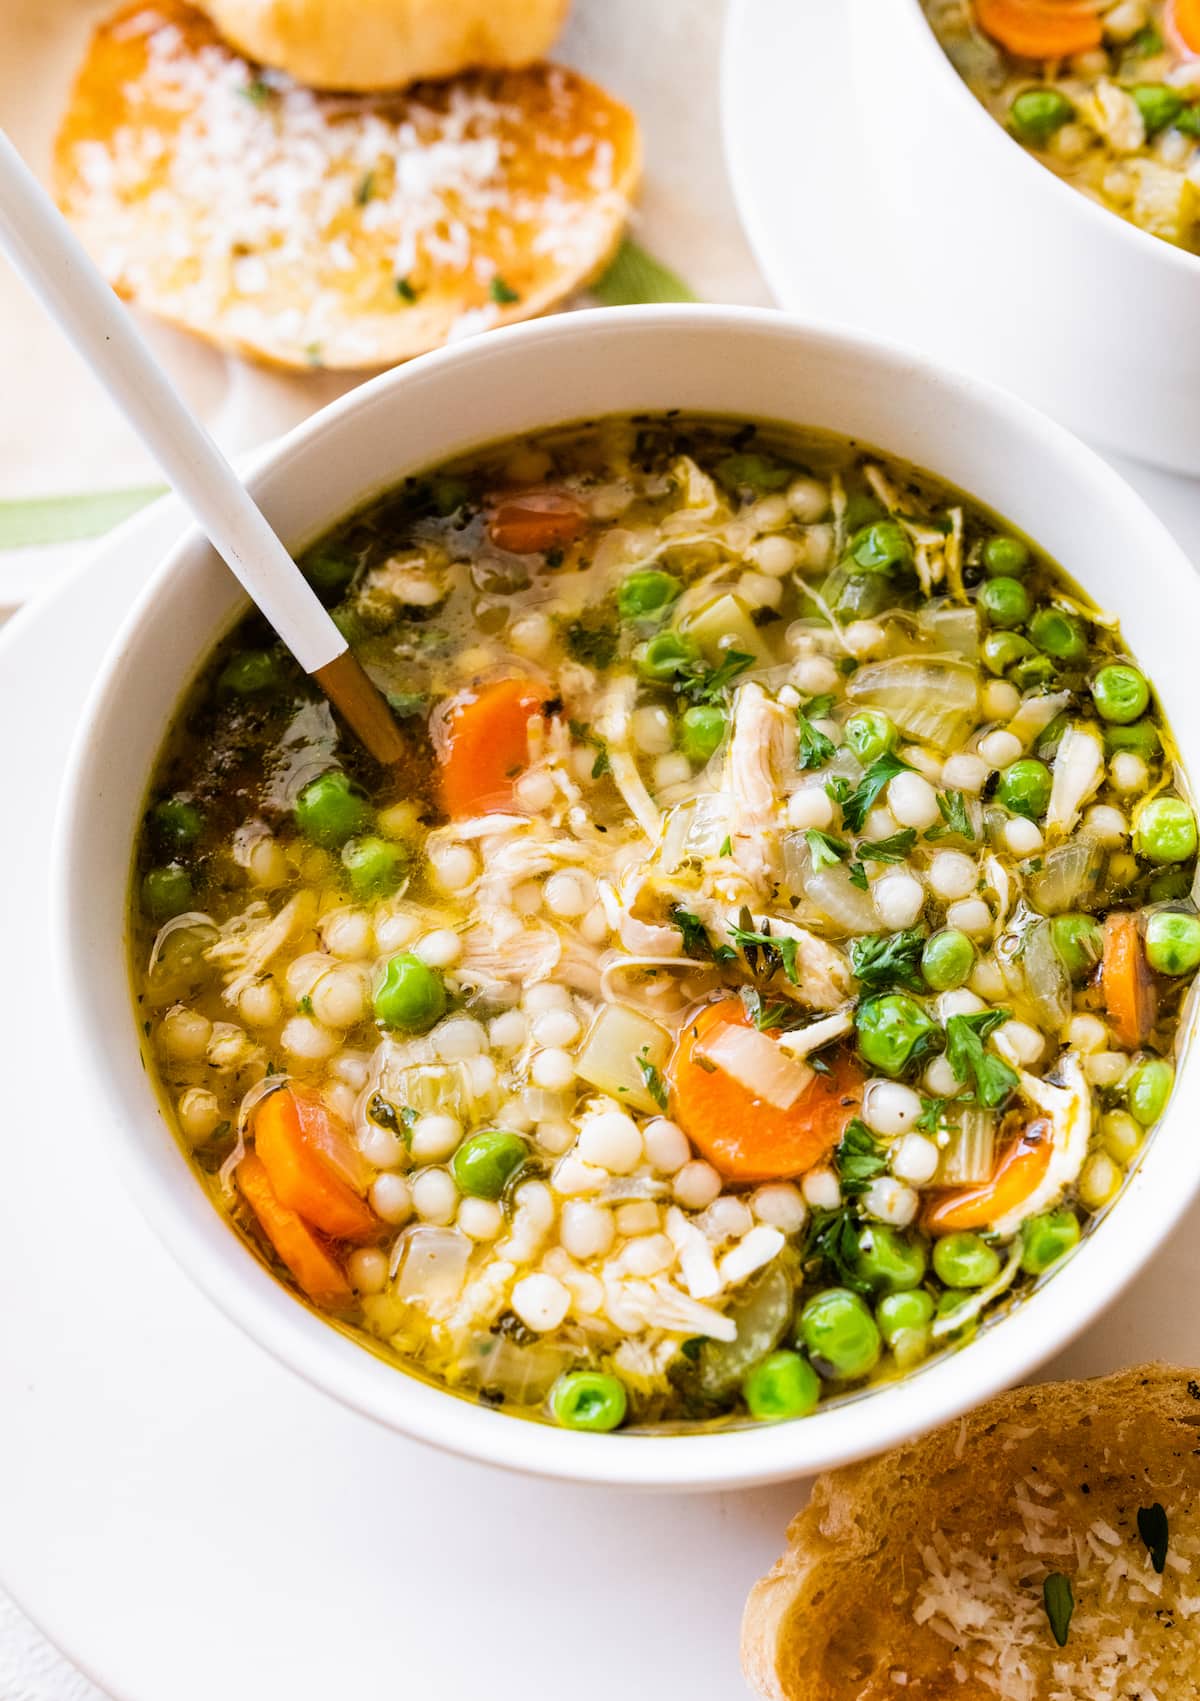 Leftover turkey soup in a bowl with multiple vegetables, including peas, carrots, and onions.